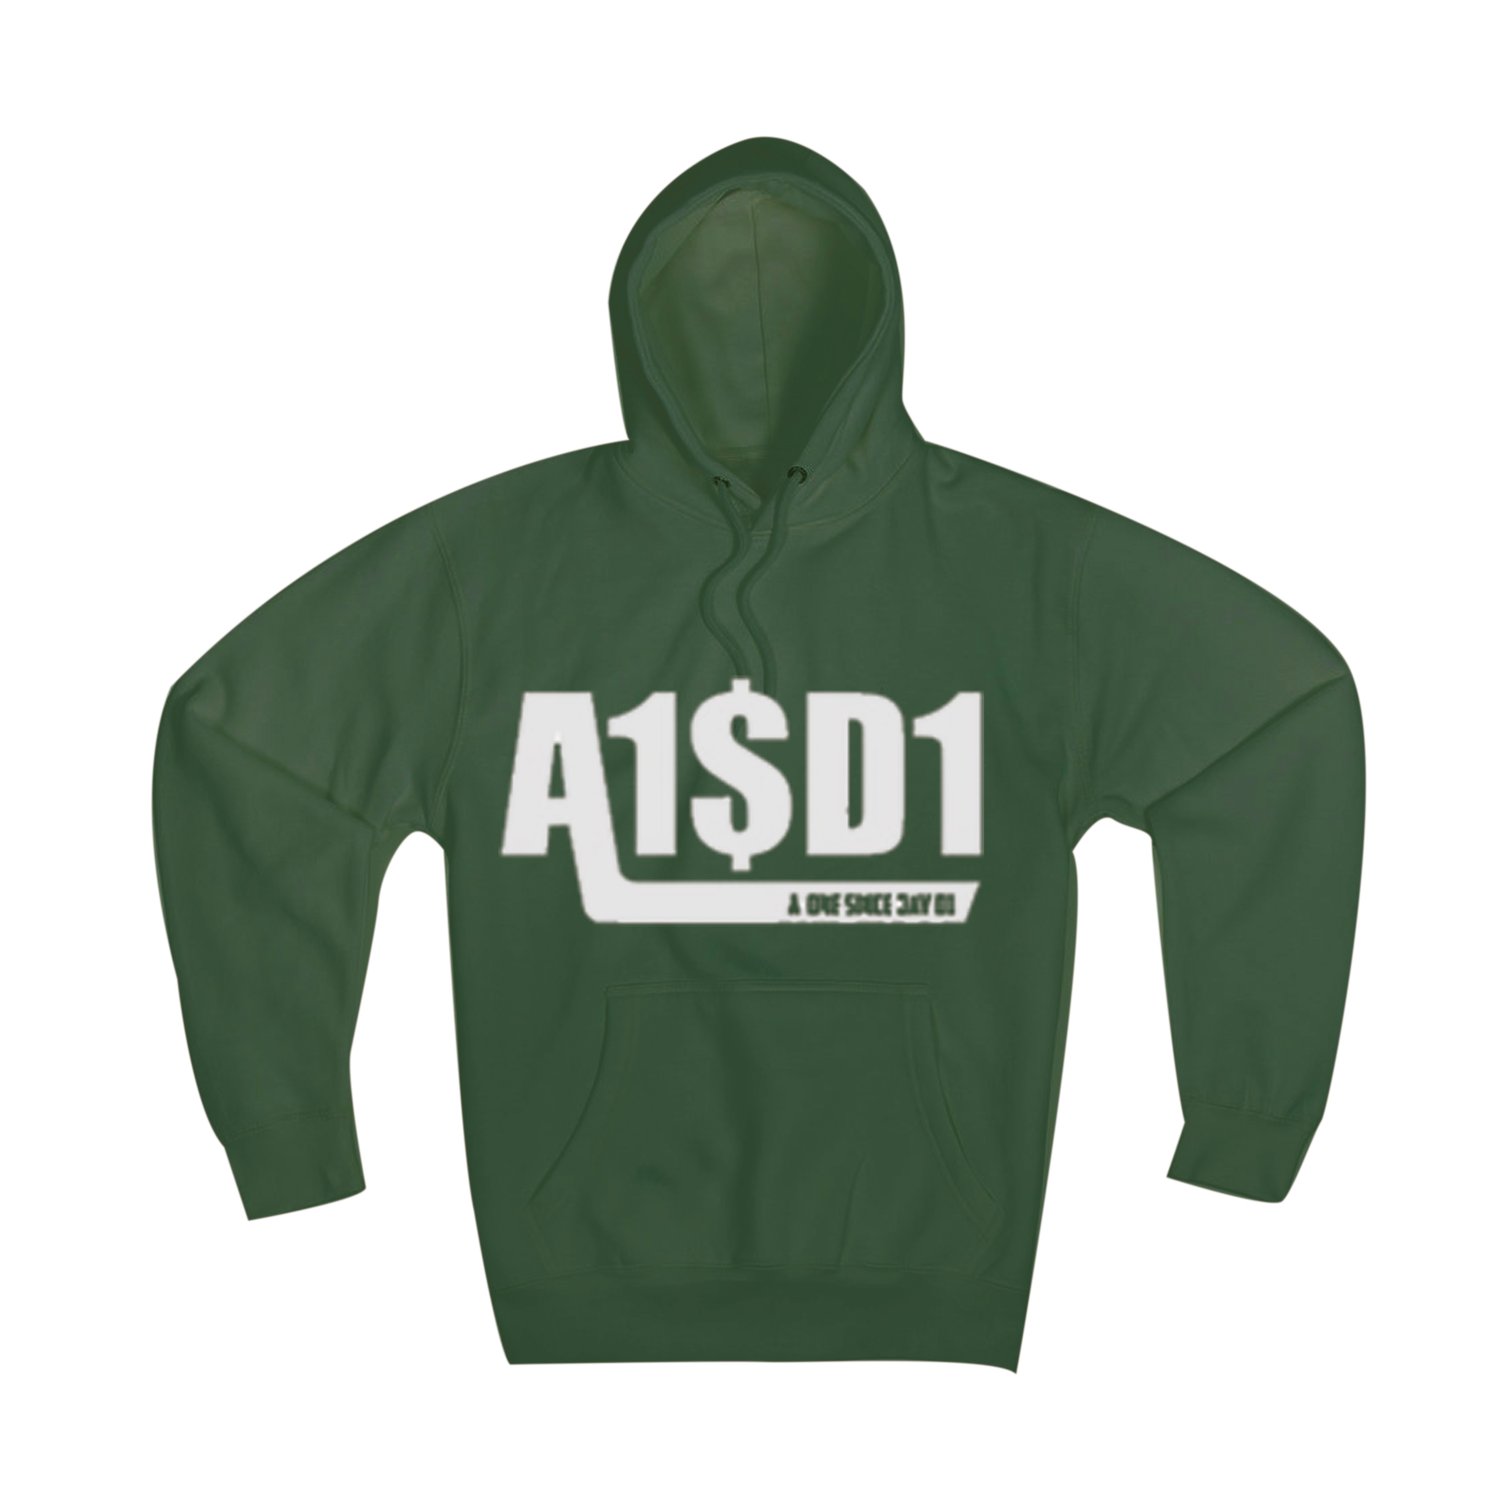 Image of A1$D1 HOODIE (GREEN X WHITE) 